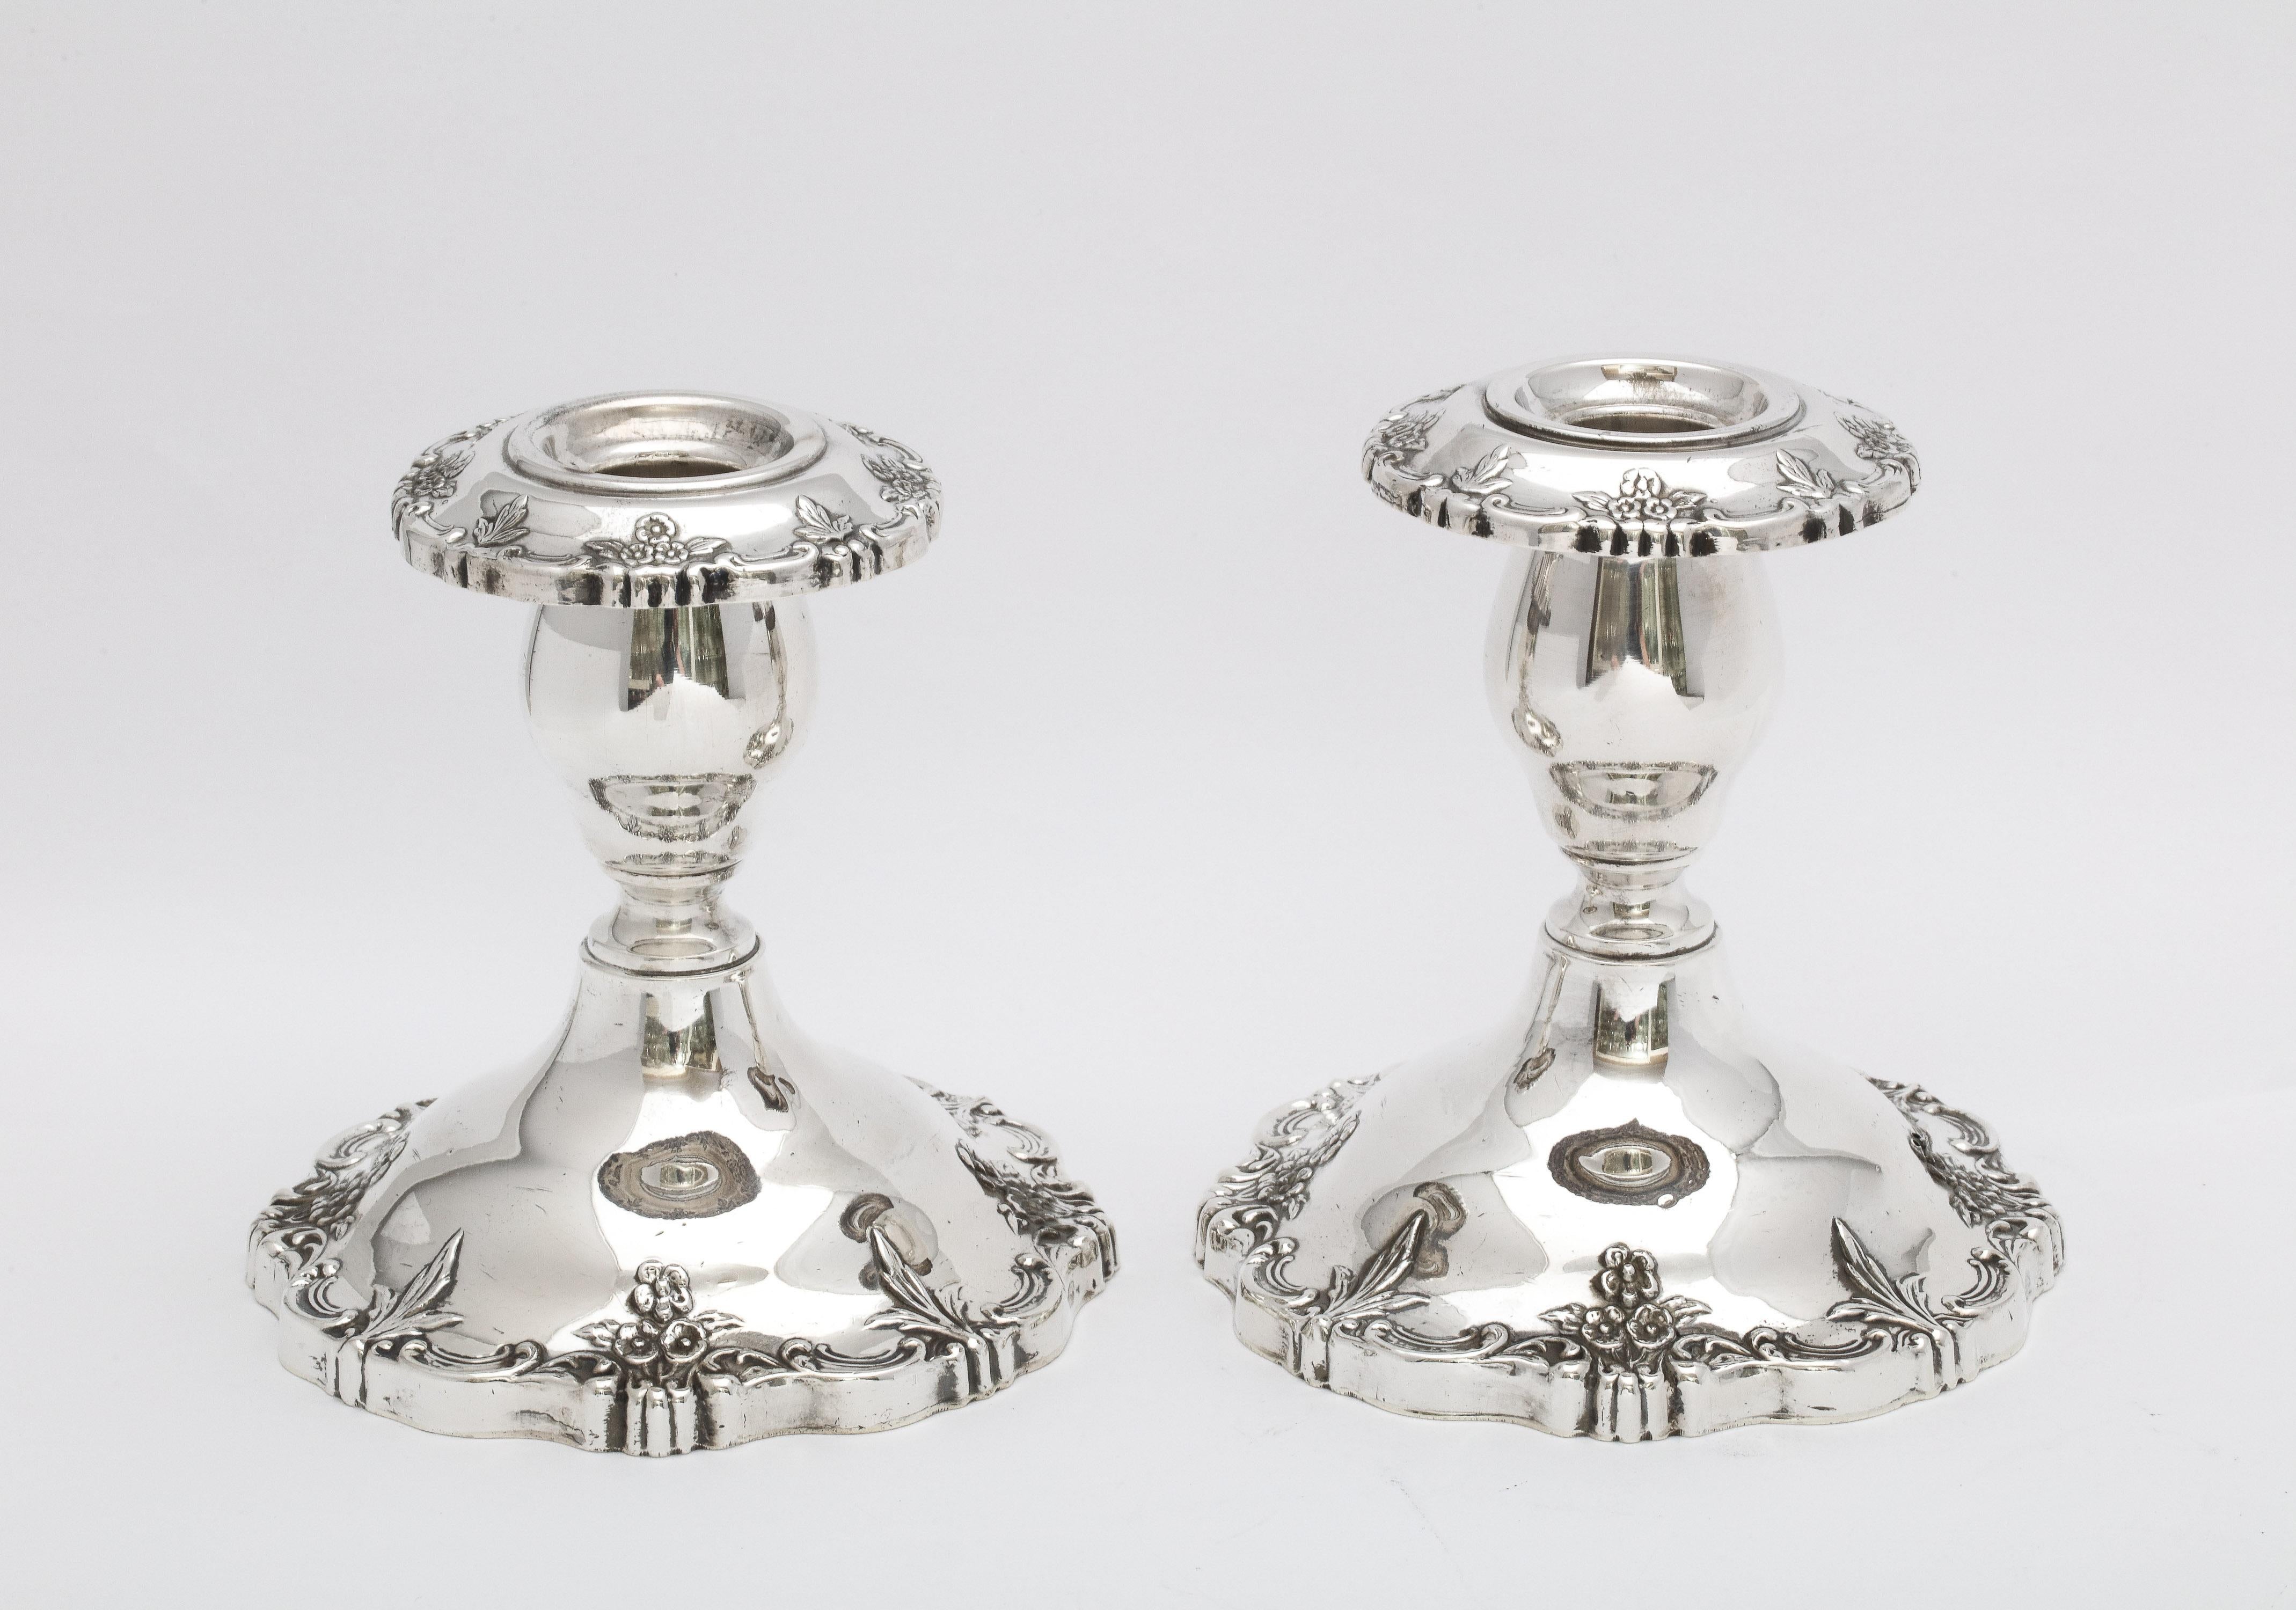 Pair of Victorian-Style, sterling silver candlesticks, Fisher Silversmiths, Inc., Jersey City, New Jersey, Ca. 1935. Each candlestick measures 5 inches high x a little under 4 3/4 inches diameter across base (widest point). Pair is weighted. Floral